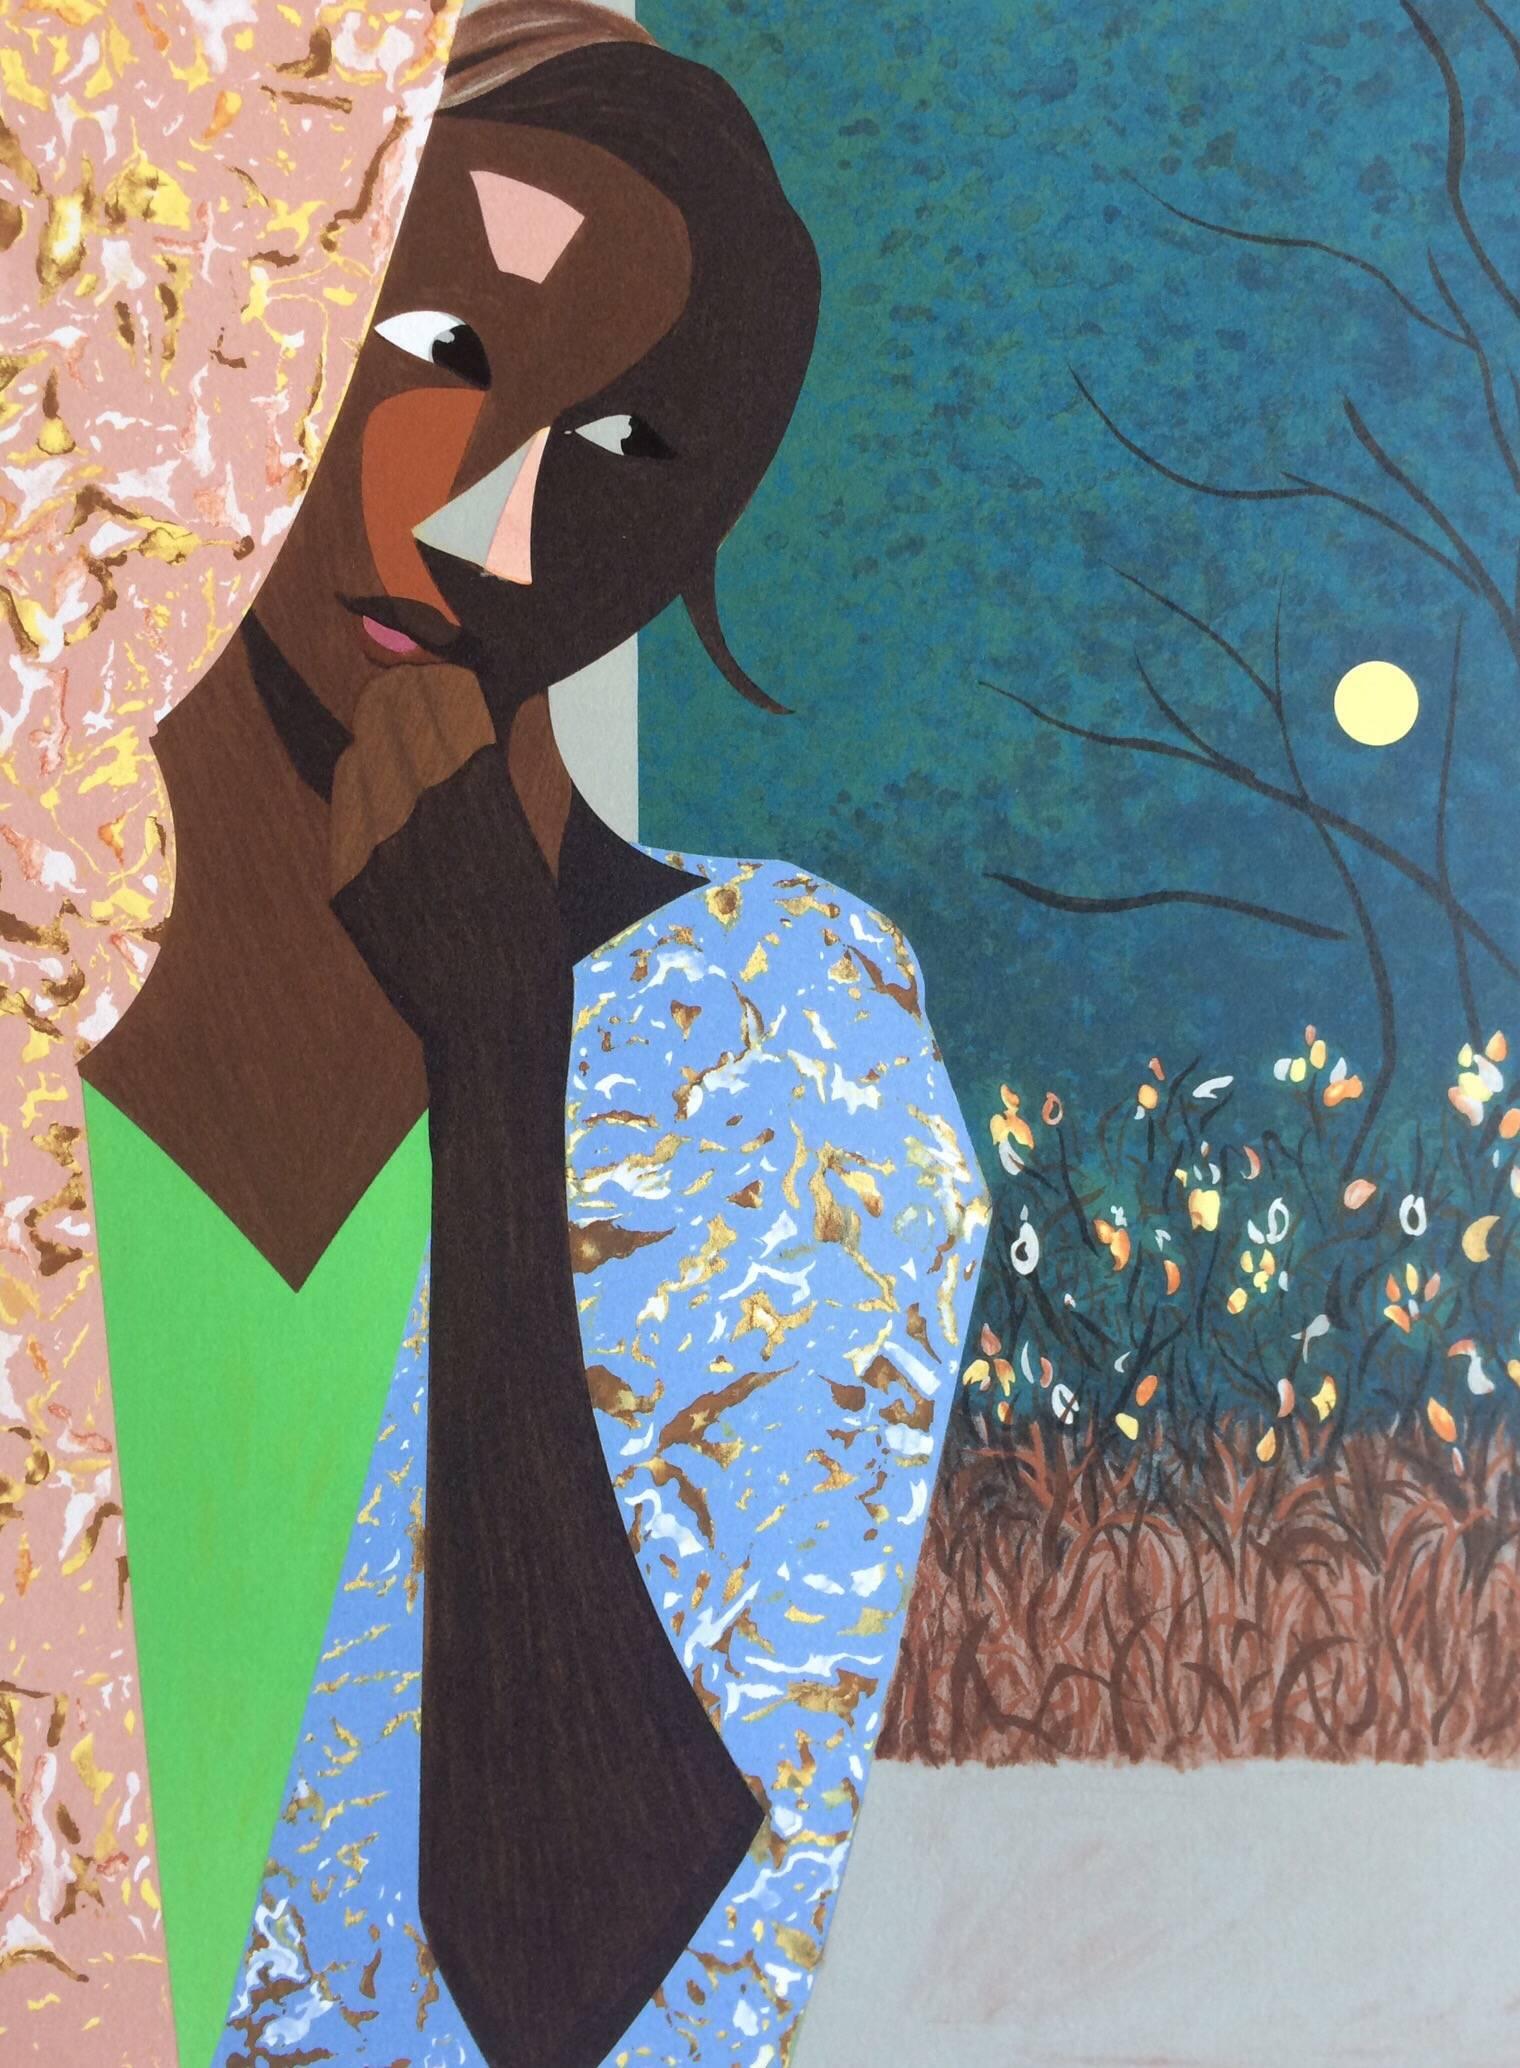 Ernest Crichlow Figurative Print - EVENING THOUGHTS Signed Lithograph, Young Black Female Portrait, Color Collage